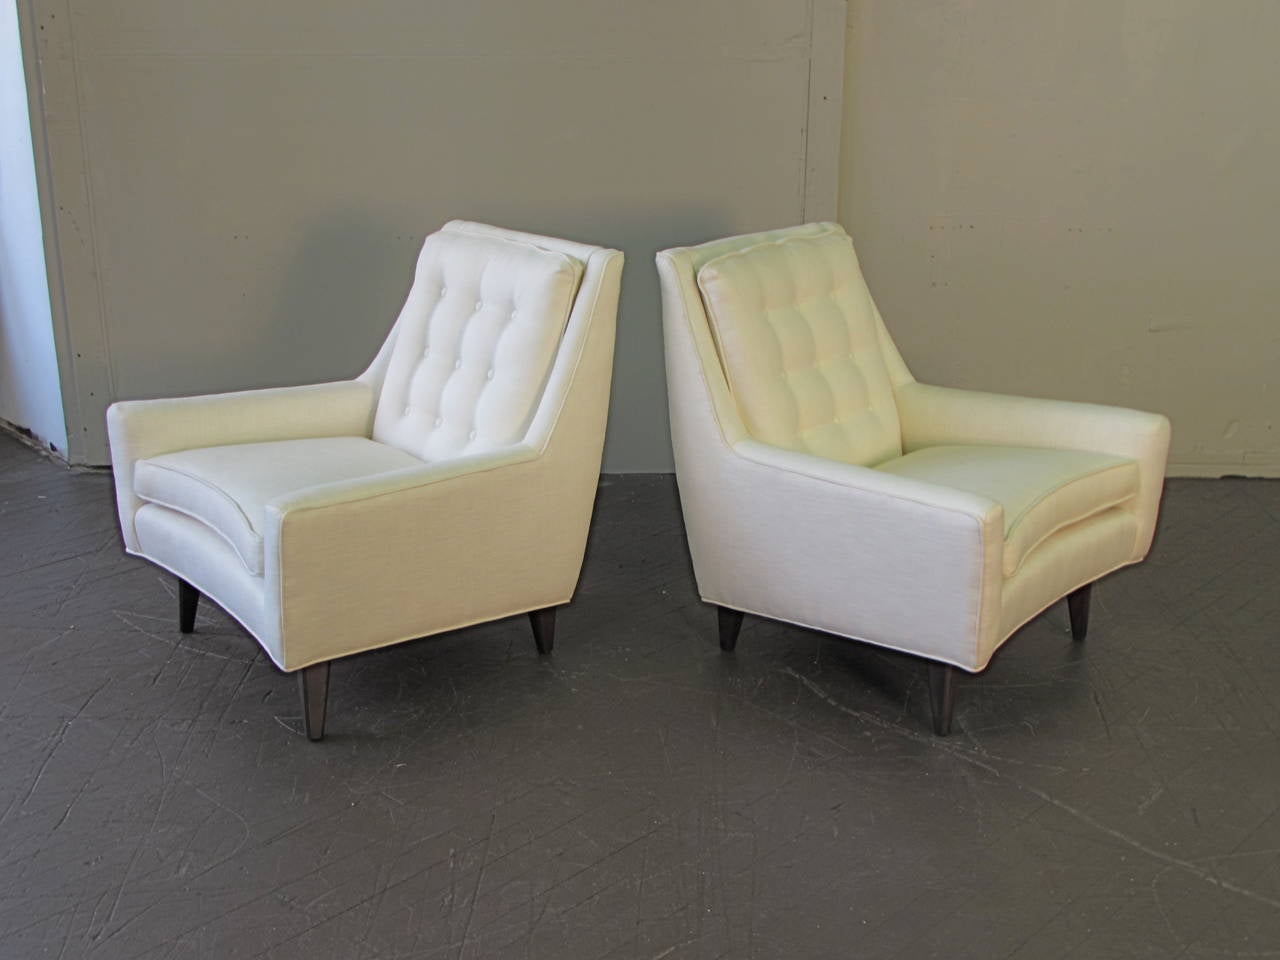 American Classic Mid-Century Modern Lounge Chairs with Curved Detail, circa 1950